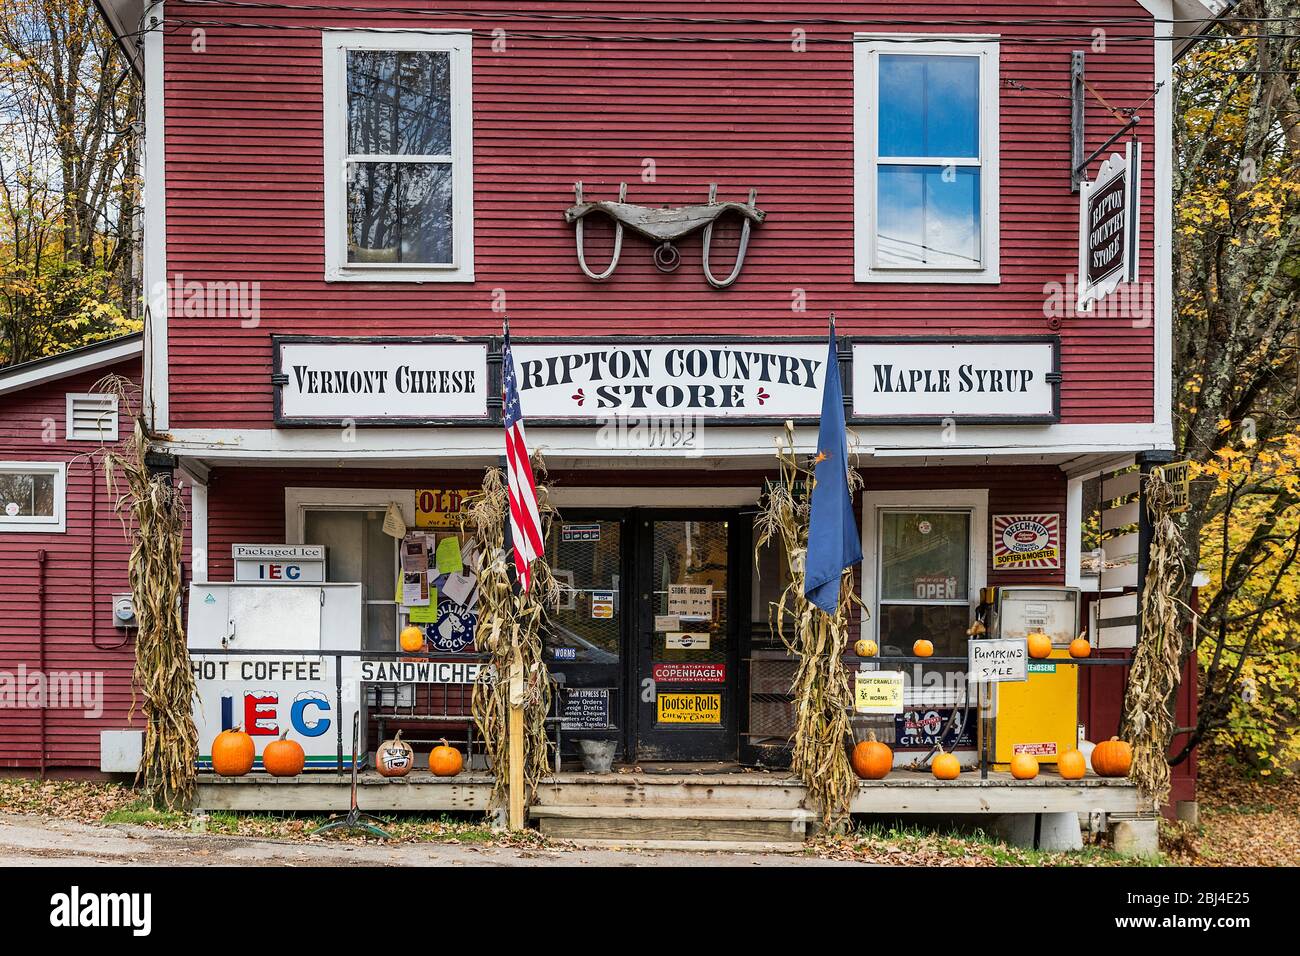 Charming Ripton Country Store. Stock Photo